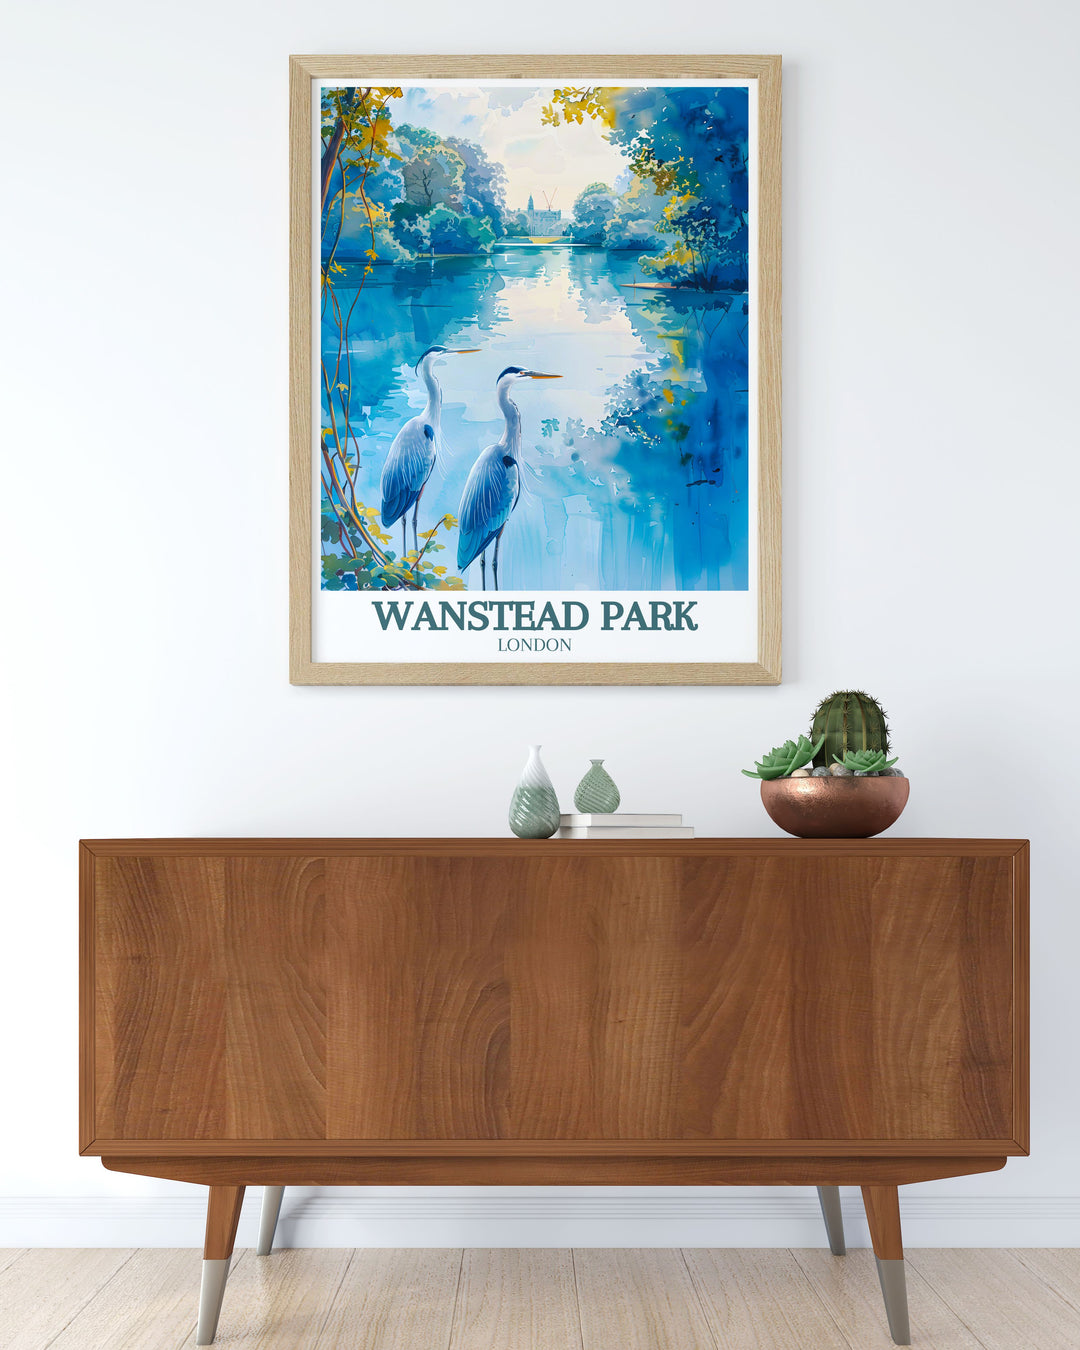 Vintage travel print of Wanstead Park with a focus on its serene landscapes and picturesque views. A must have for anyone who loves East London parks and wants to bring a touch of nature and tranquility into their living space.